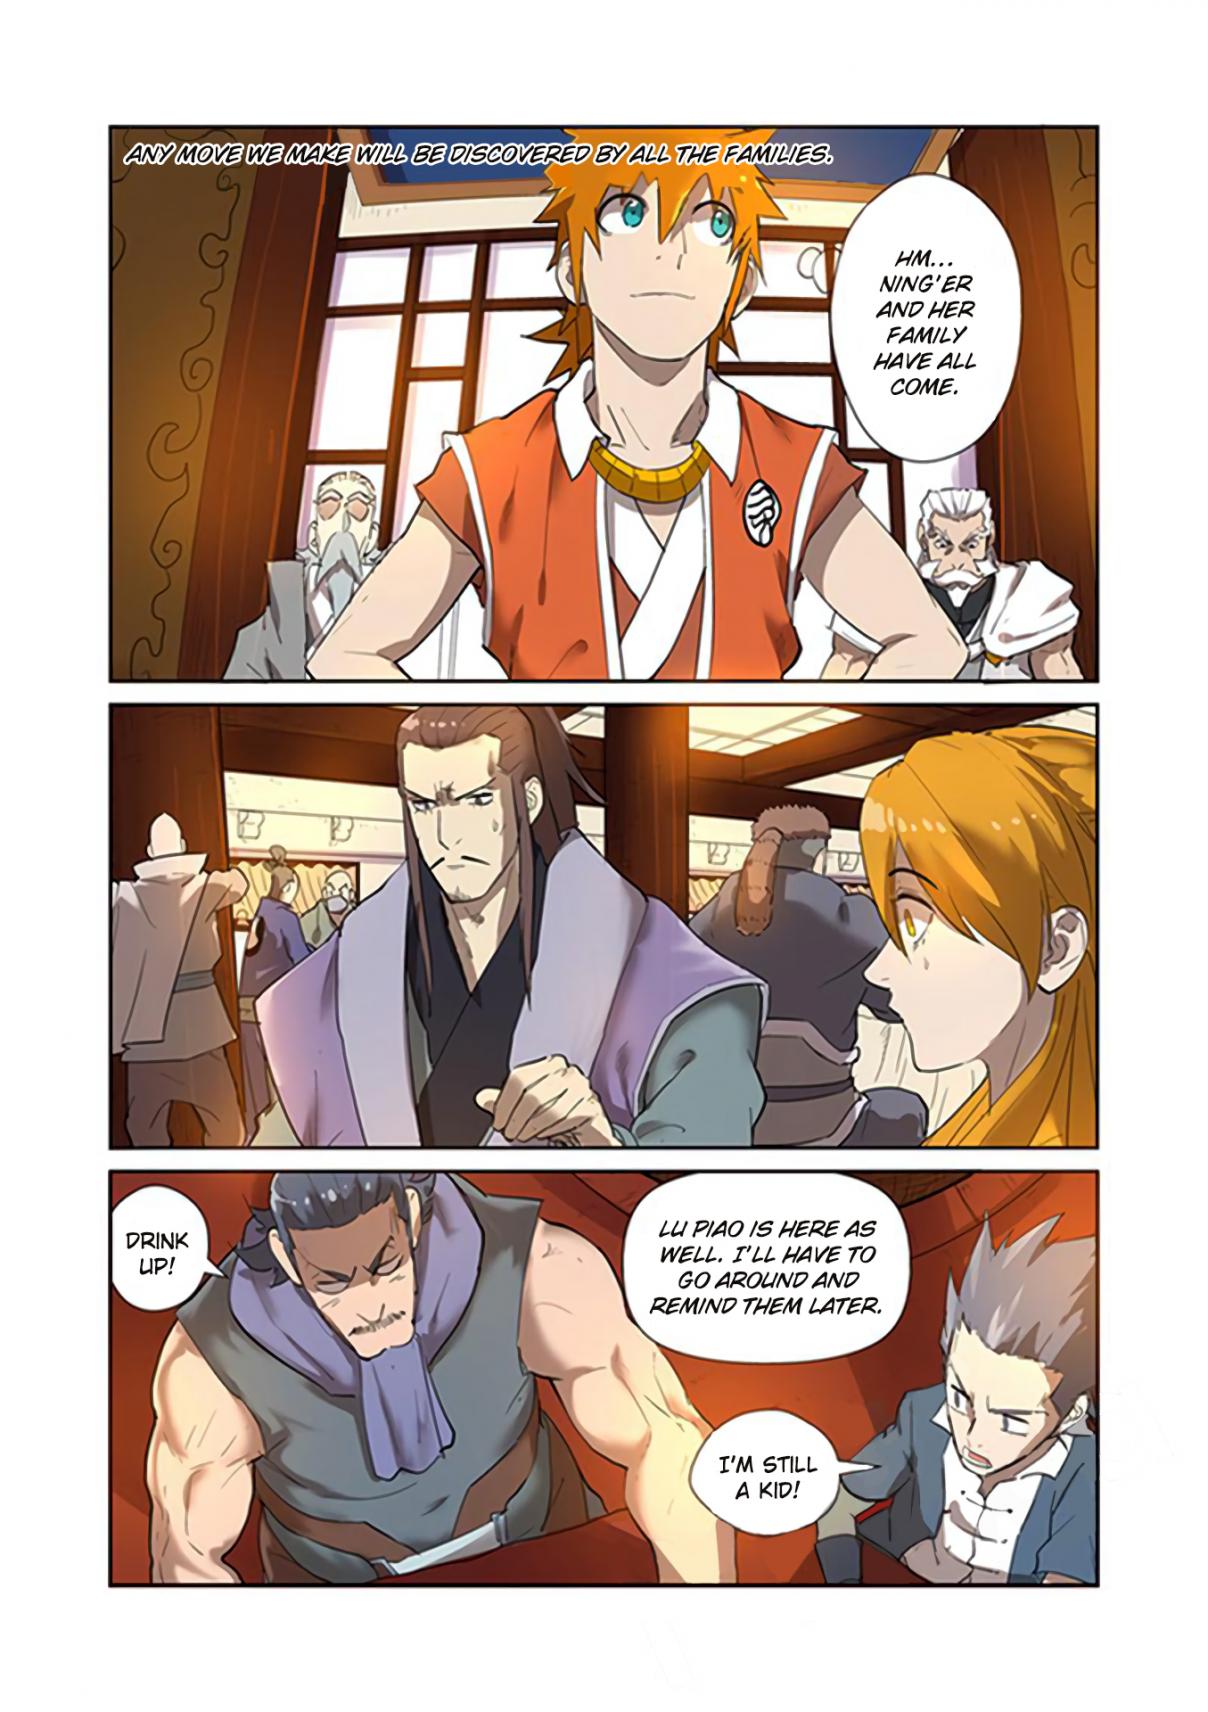 Tales of Demons and Gods Ch. 198.5 Impending Nightfall (Part 2)